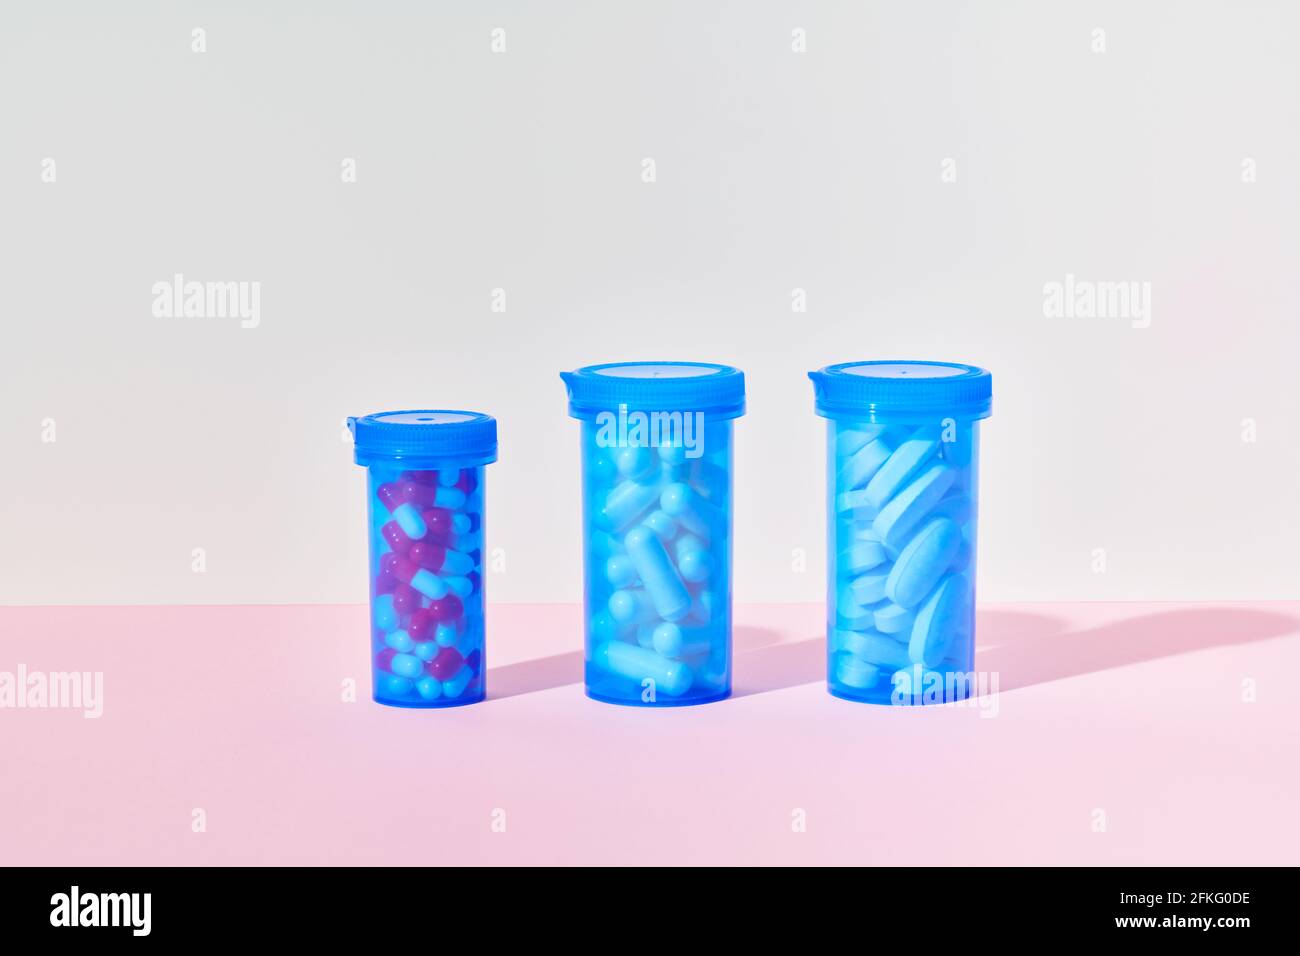 Bottles of medicine pills and capsules on pink background Stock Photo